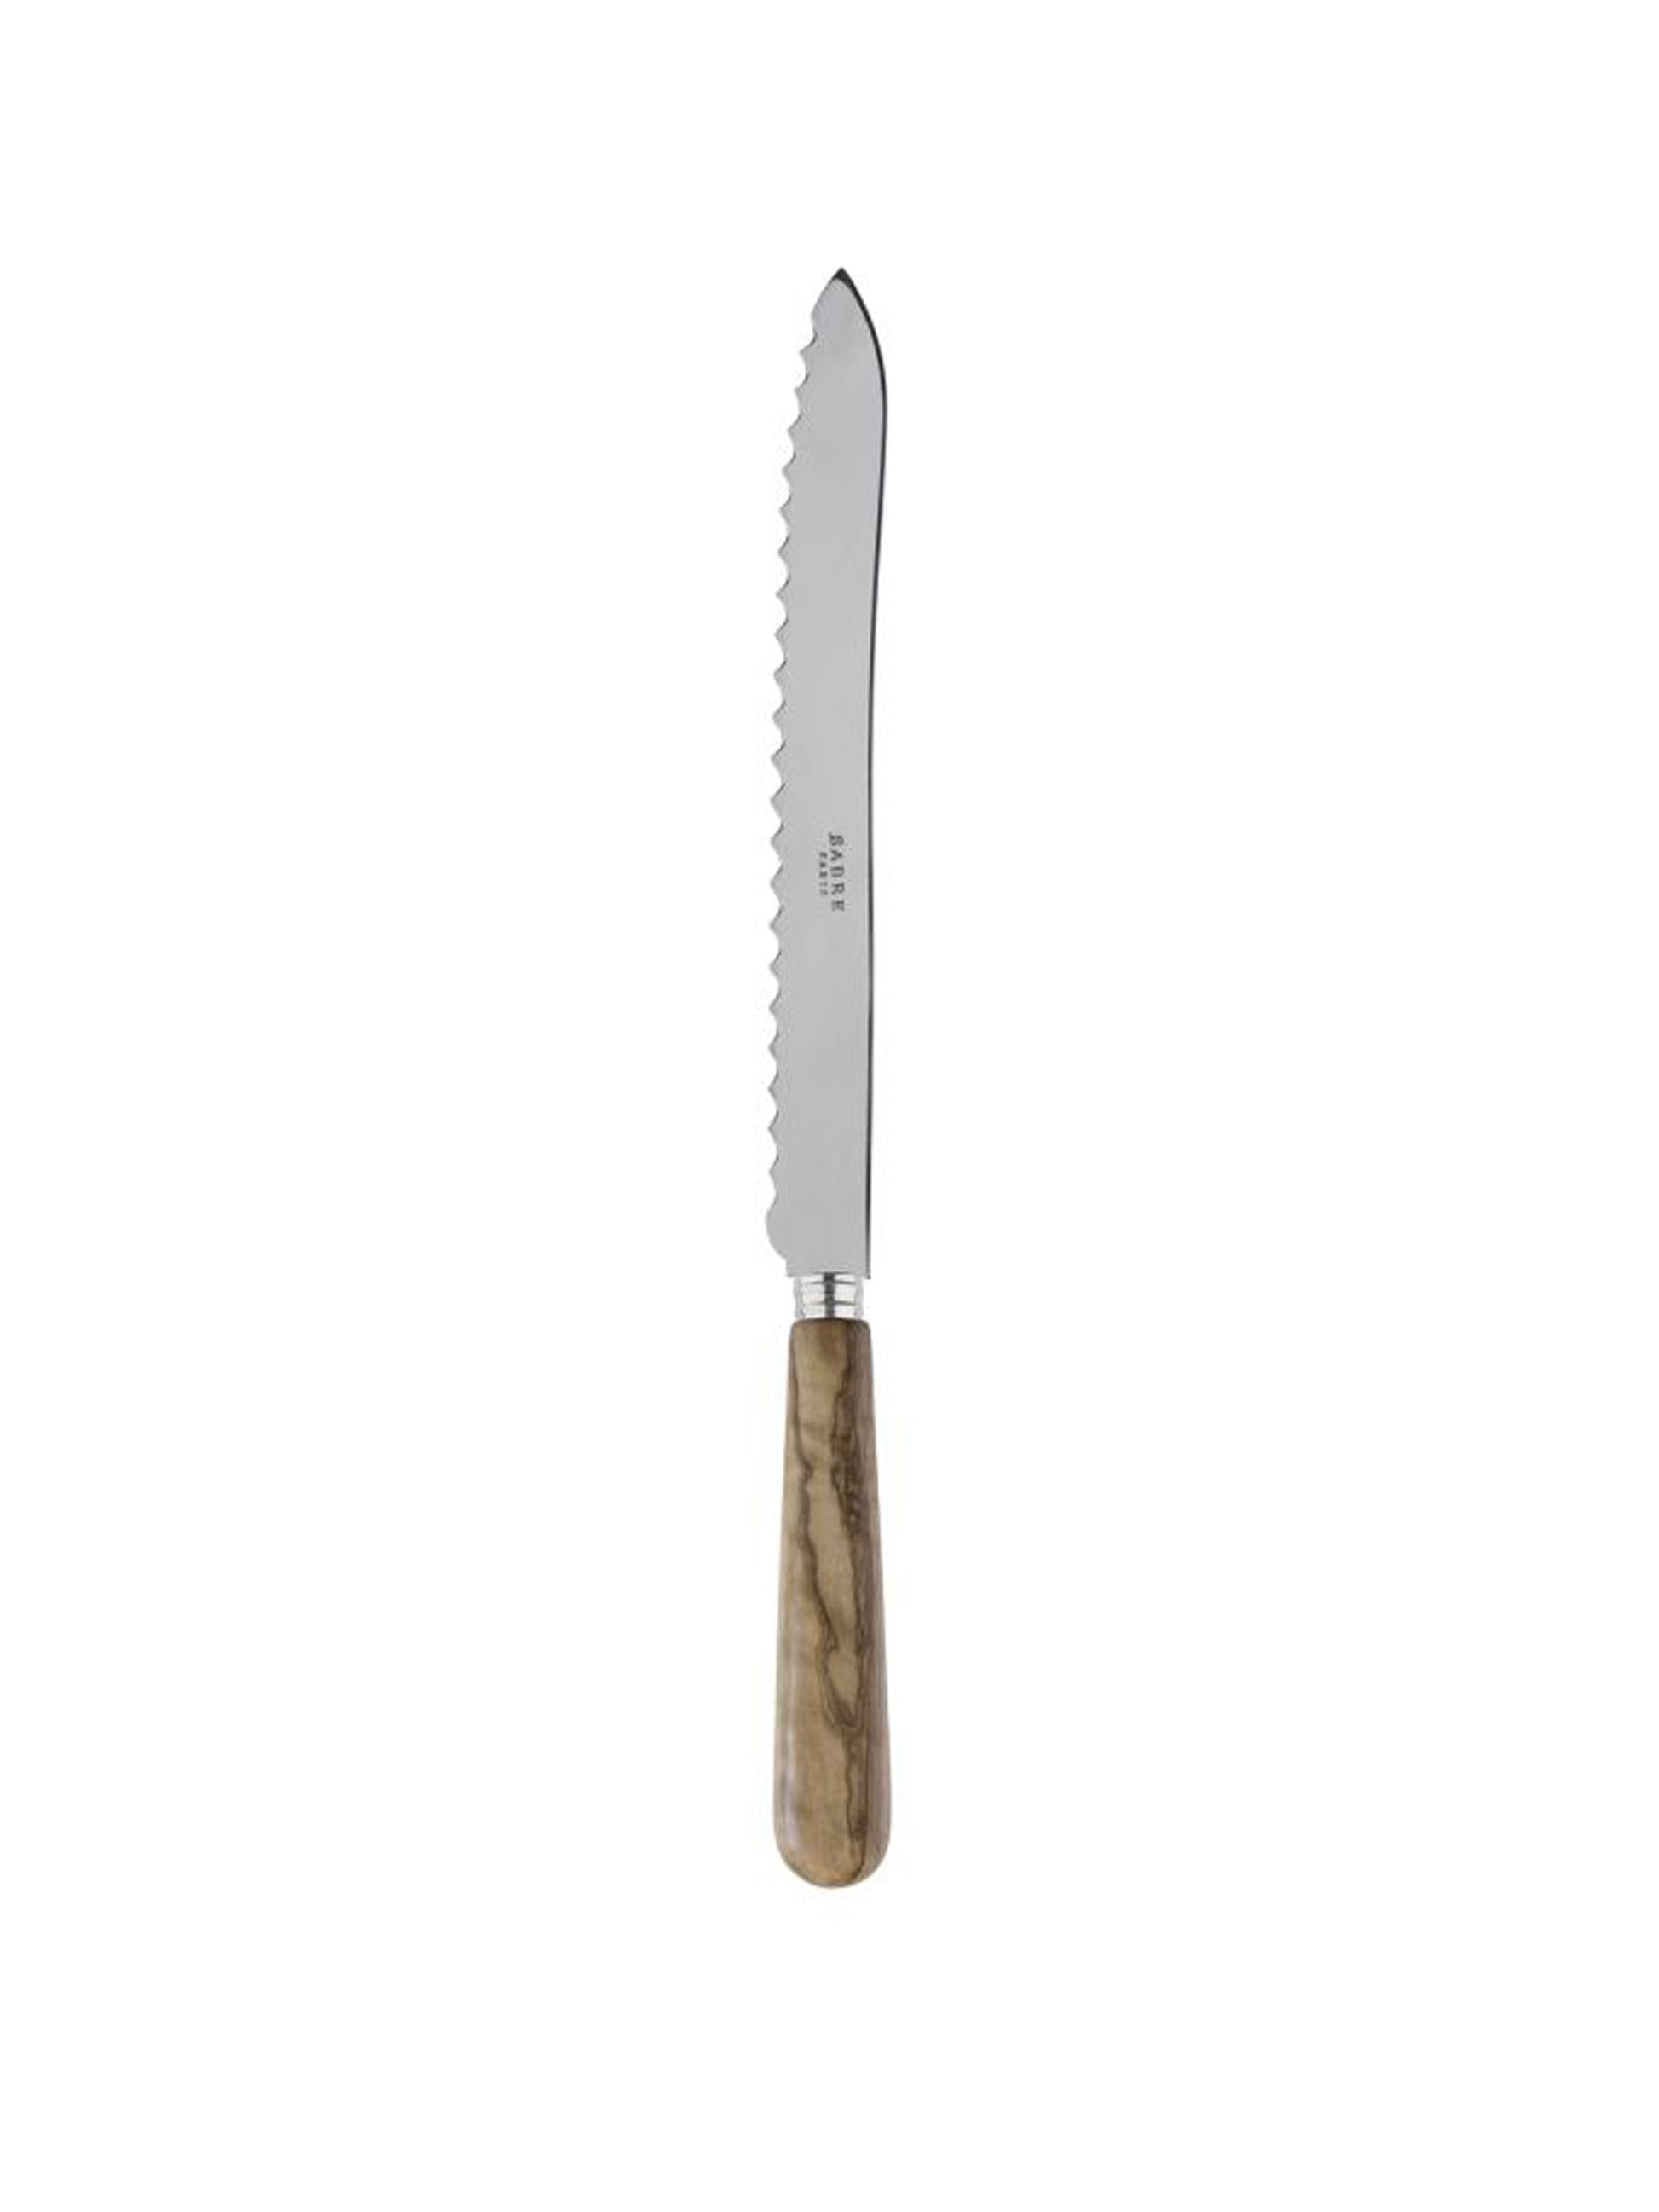 Shop Oyster Knives & Accessories at Weston Table